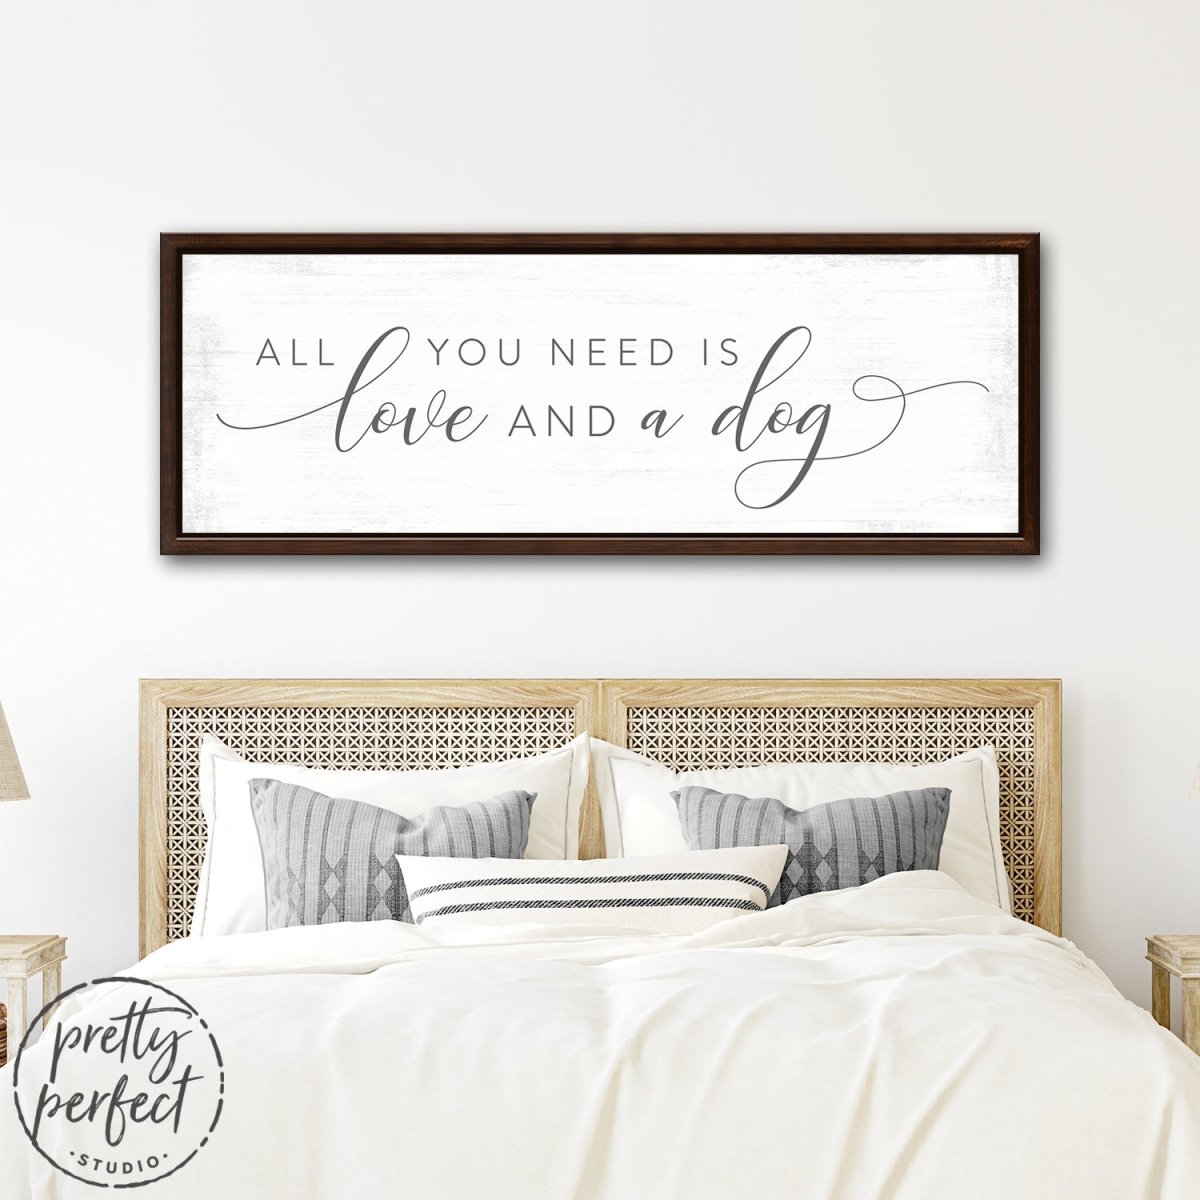 All You Need Is Love And A Dog Canvas Sign Above Bed - Pretty Perfect Studio